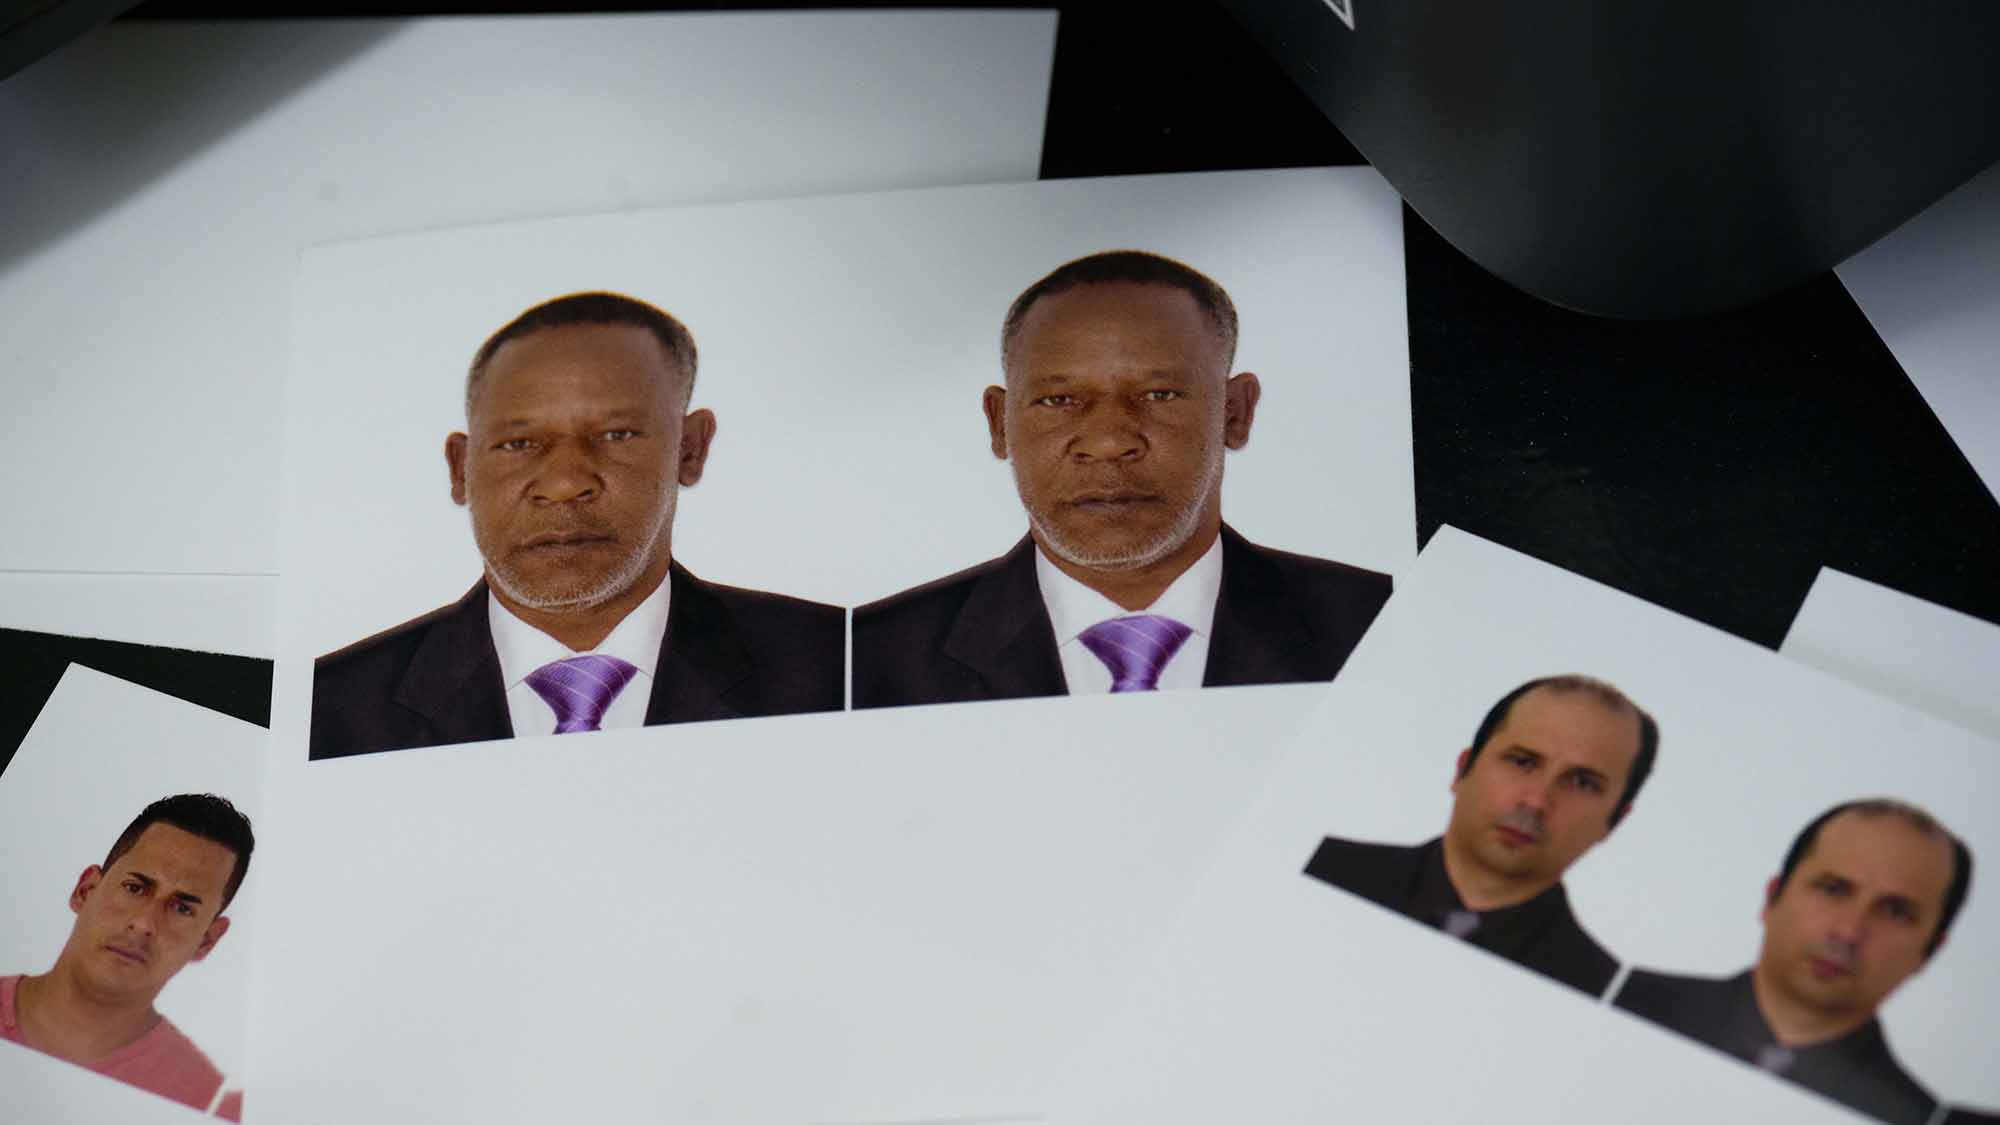 This Dude Photoshops Suits On To Cuban Passport Photos For A Living